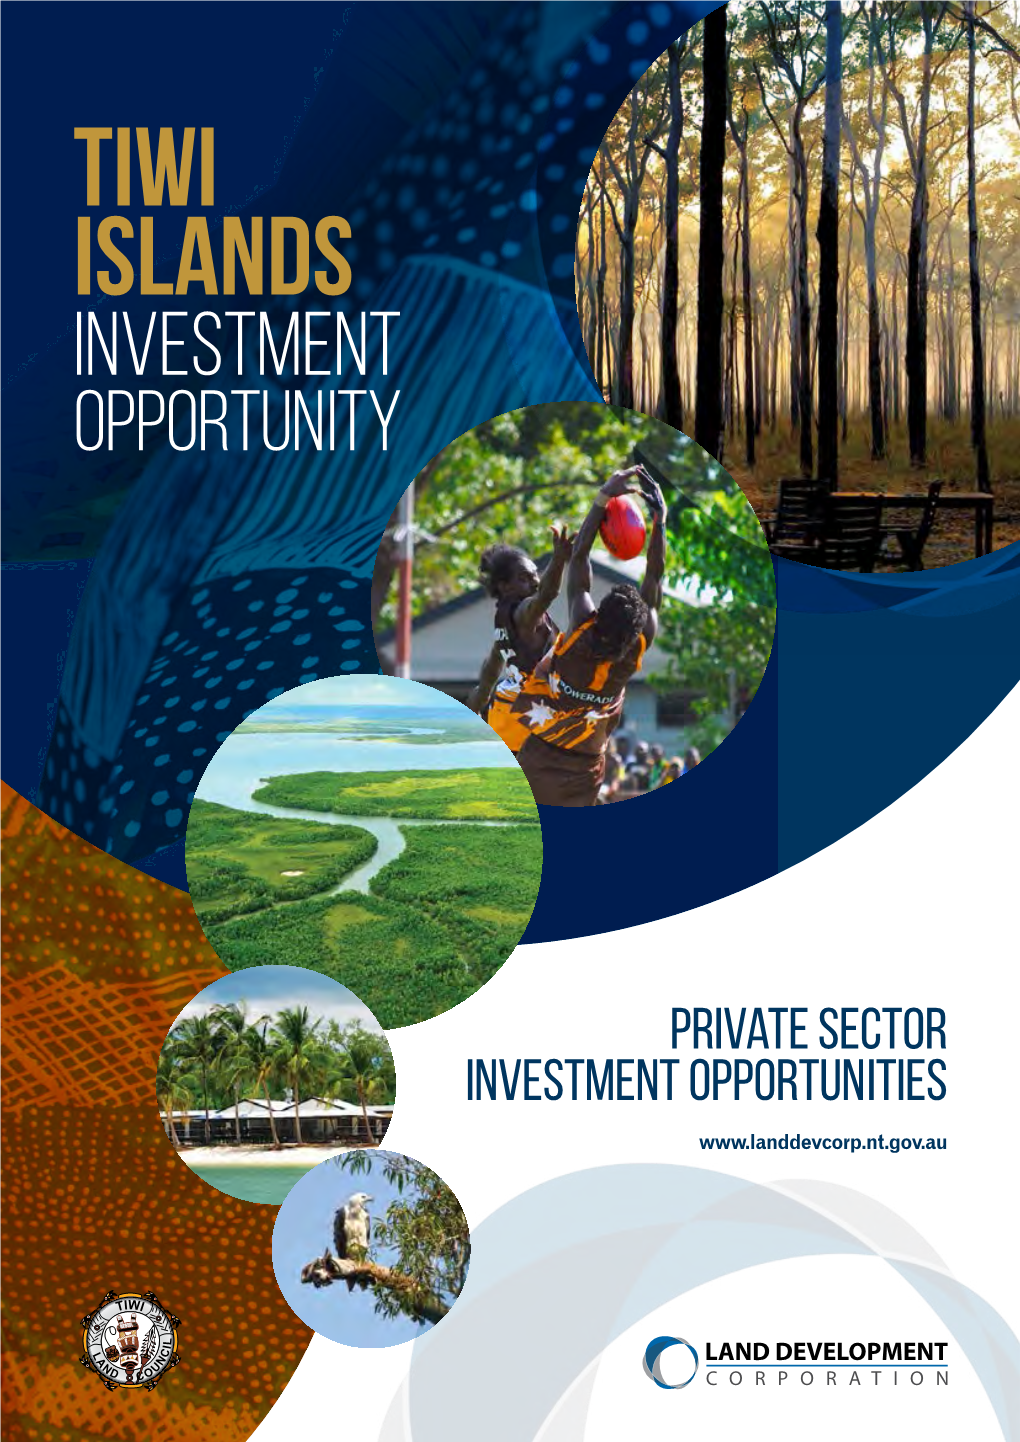 Tiwi Islands Investment Opportunity